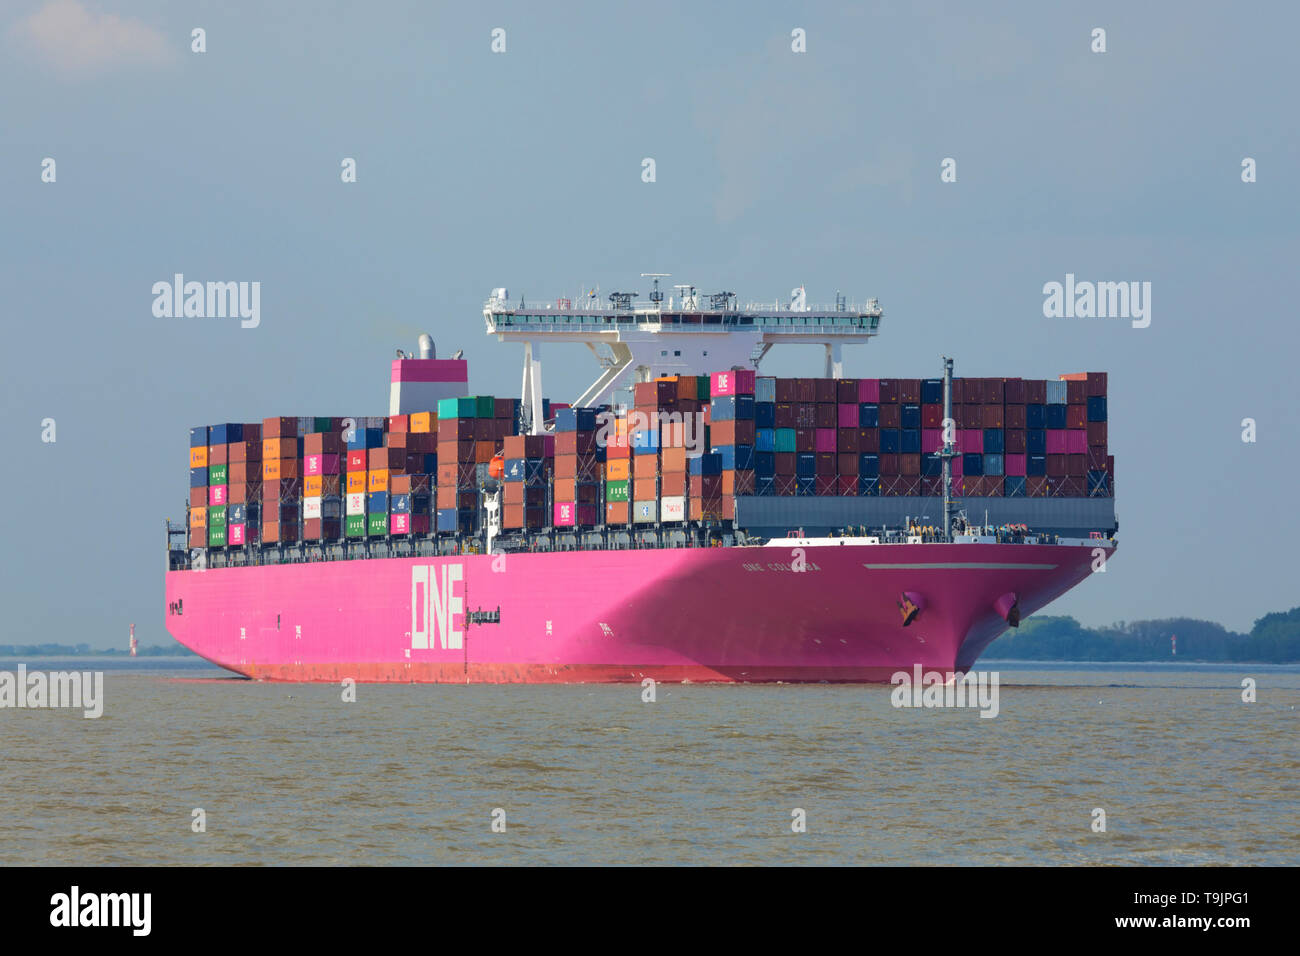 Ocean network express hi-res stock photography and images - Alamy